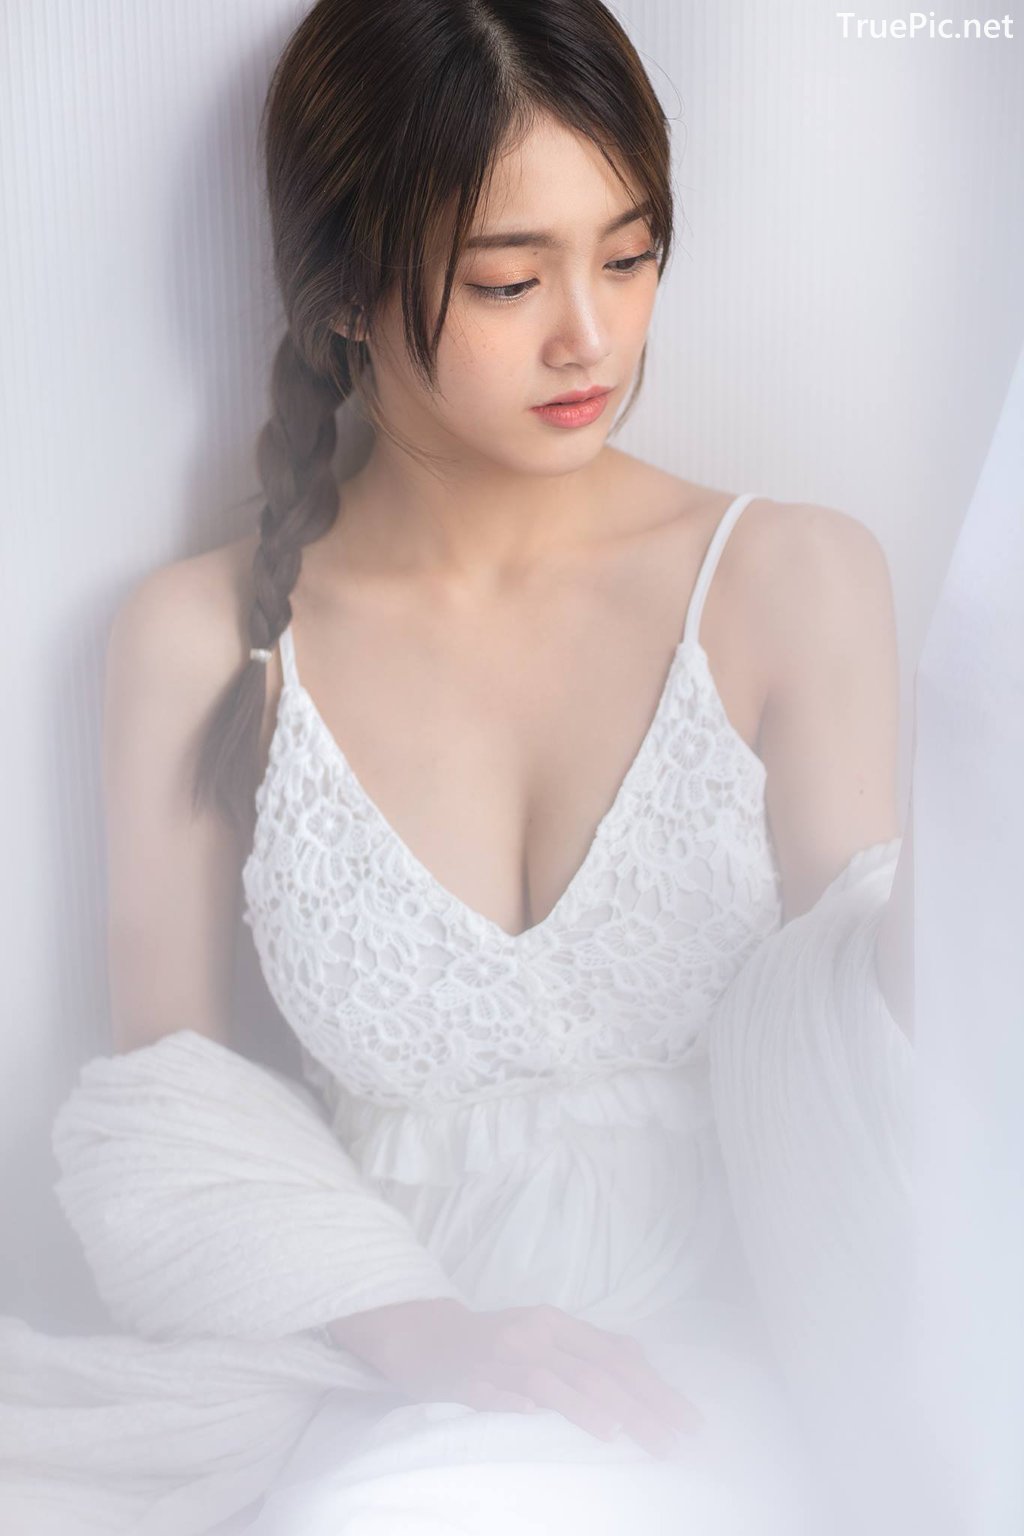 Image Thailand Model - Pimploy Chitranapawong - Beautiful In White - TruePic.net - Picture-15